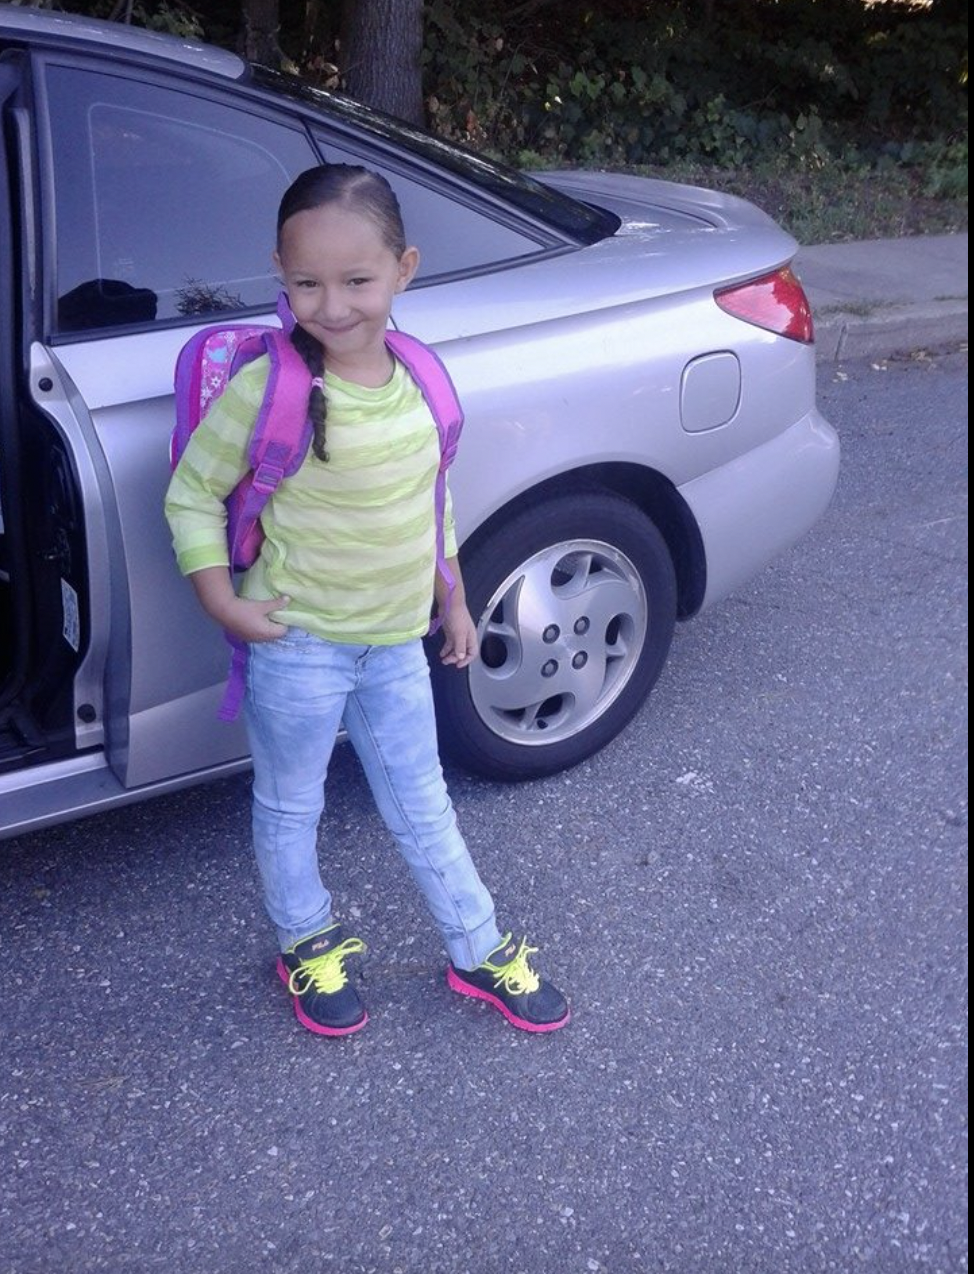 A young Ahliana Dickey standing next to a car wearing a backpack, as seen in a photo dated September 8, 2014 | Source: Facebook/stephanie.wetherbee